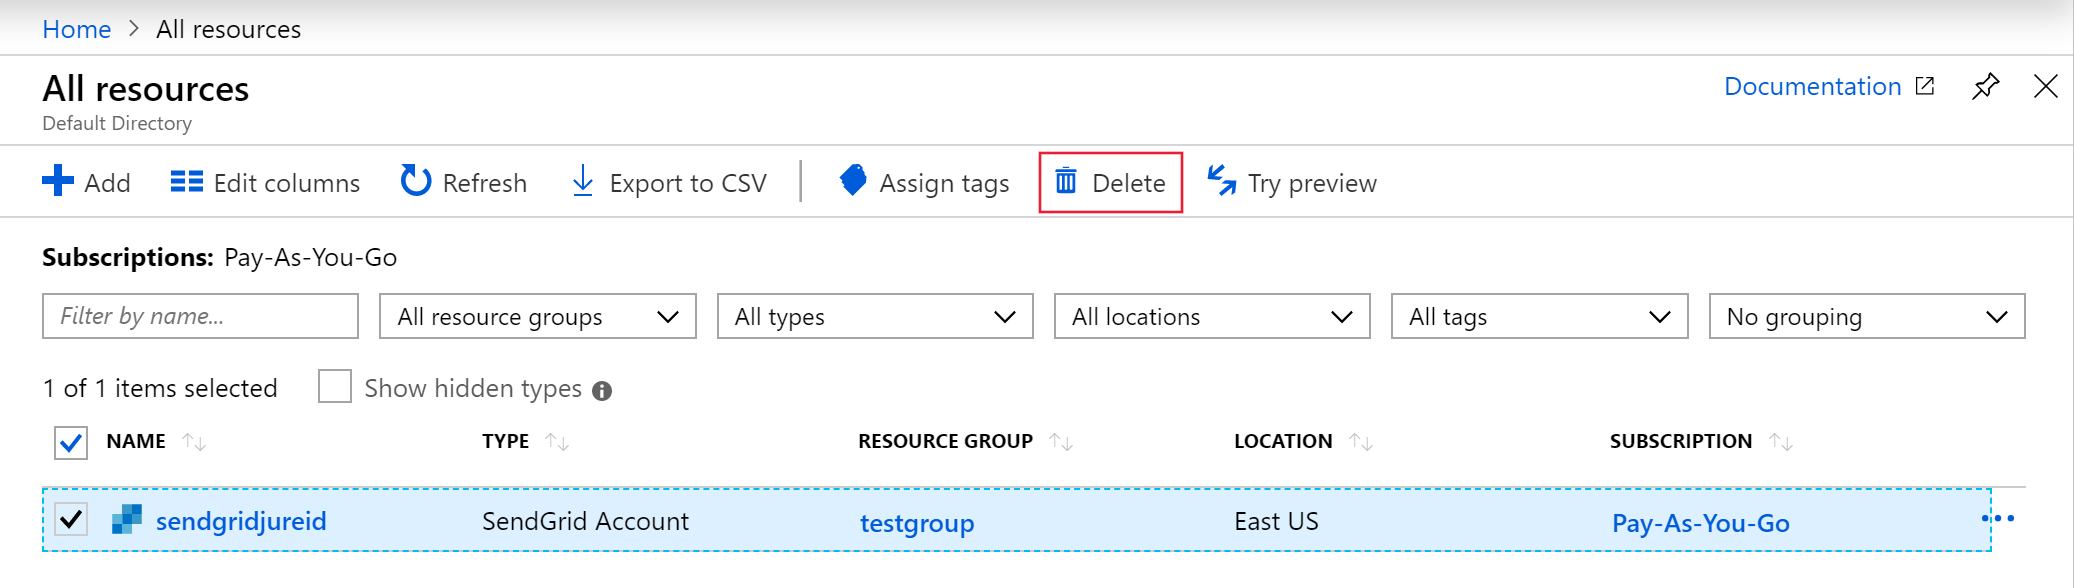 Screenshot showing the All resources page where you select Delete.